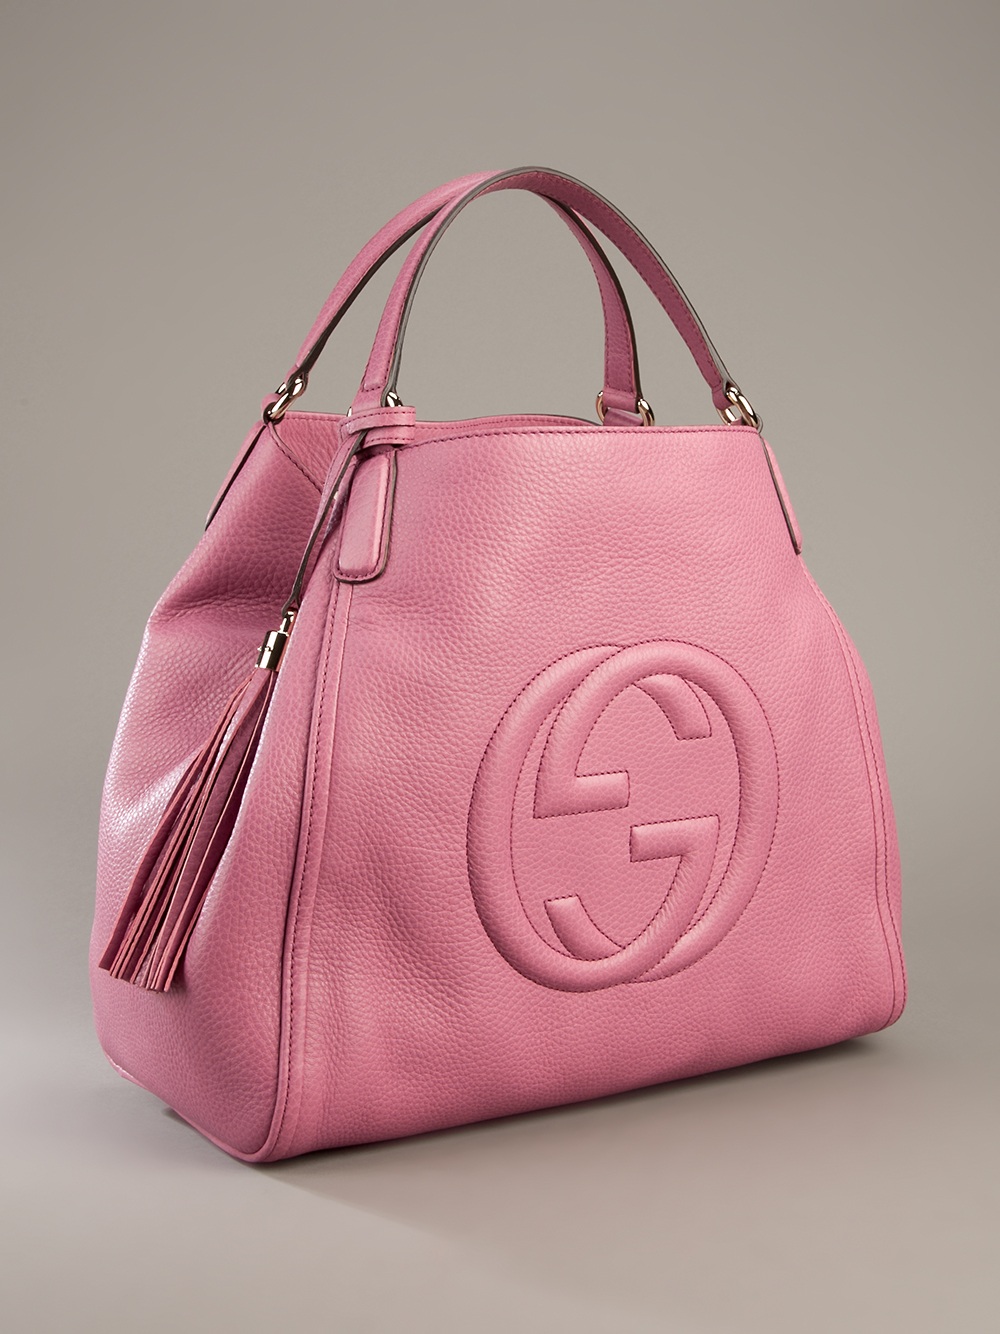 Gucci Soho Large Sized Bag in Pink - Lyst